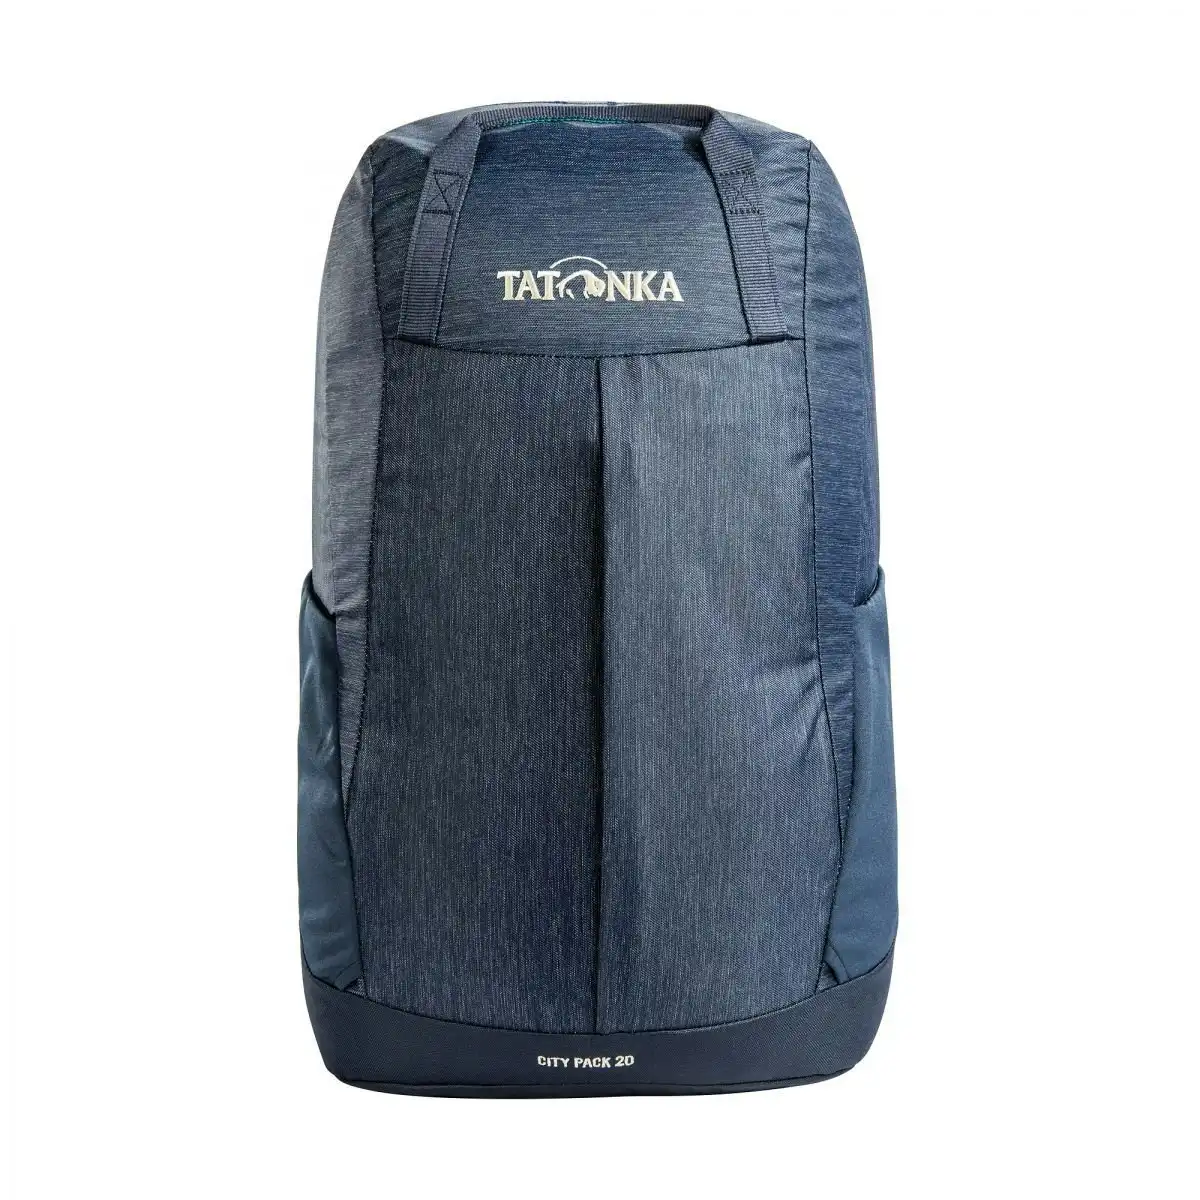 Tatonka City Pack 20L Backpack w/ Hip/Chest Belt Laptop Compartment Storage Navy